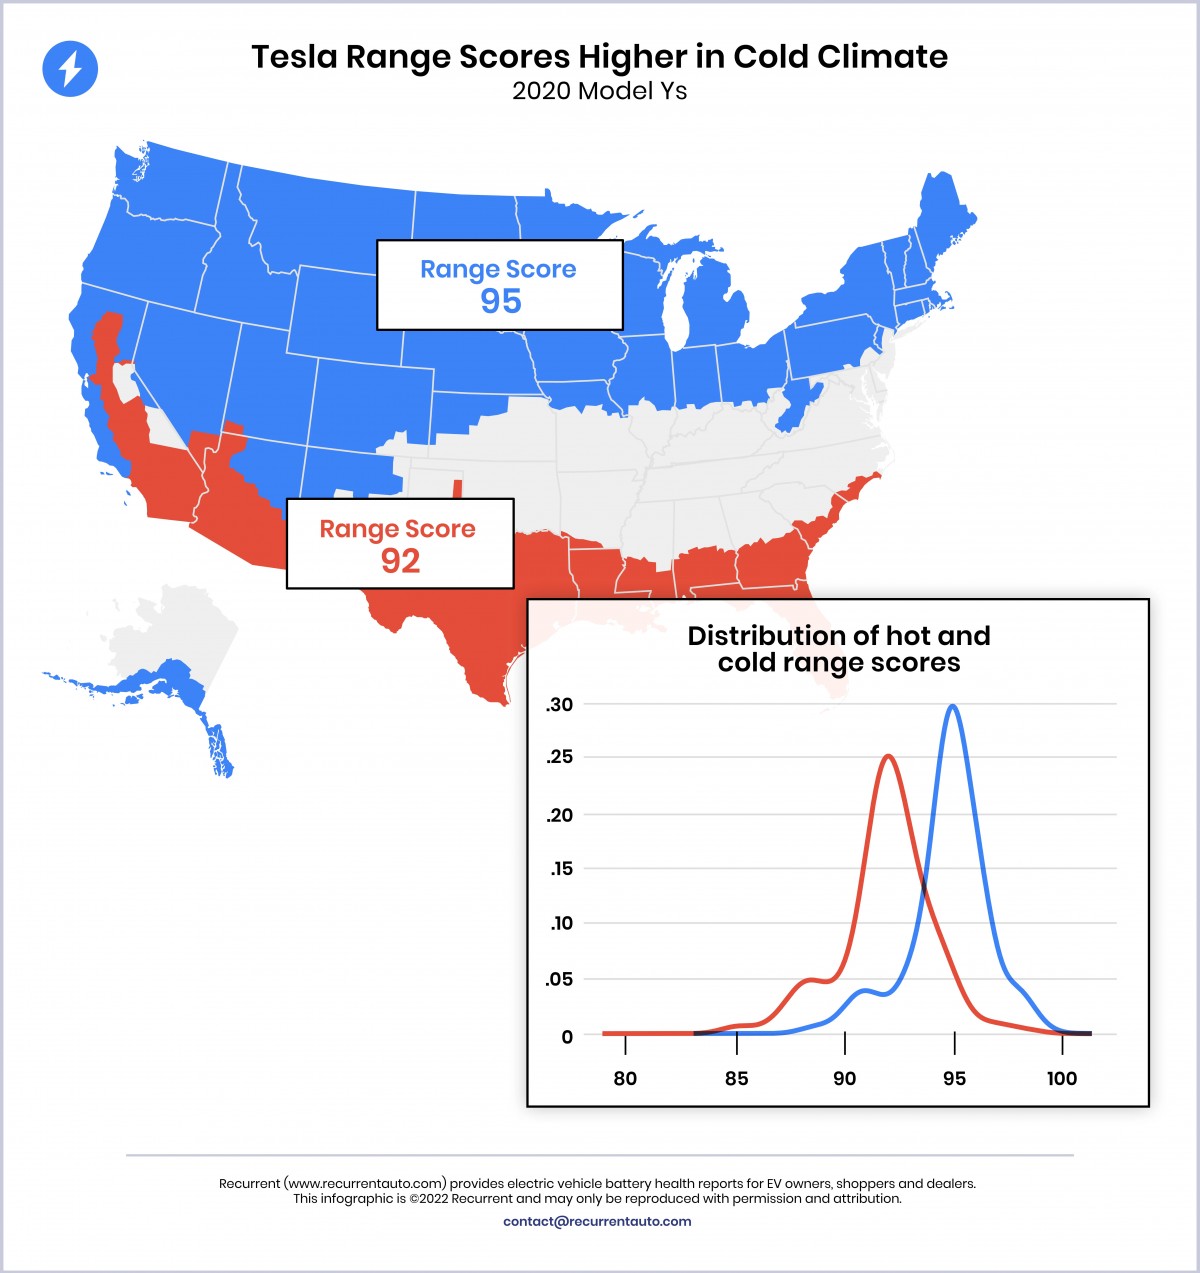 Colder climates better for battery health, study on Tesla Model Y shows